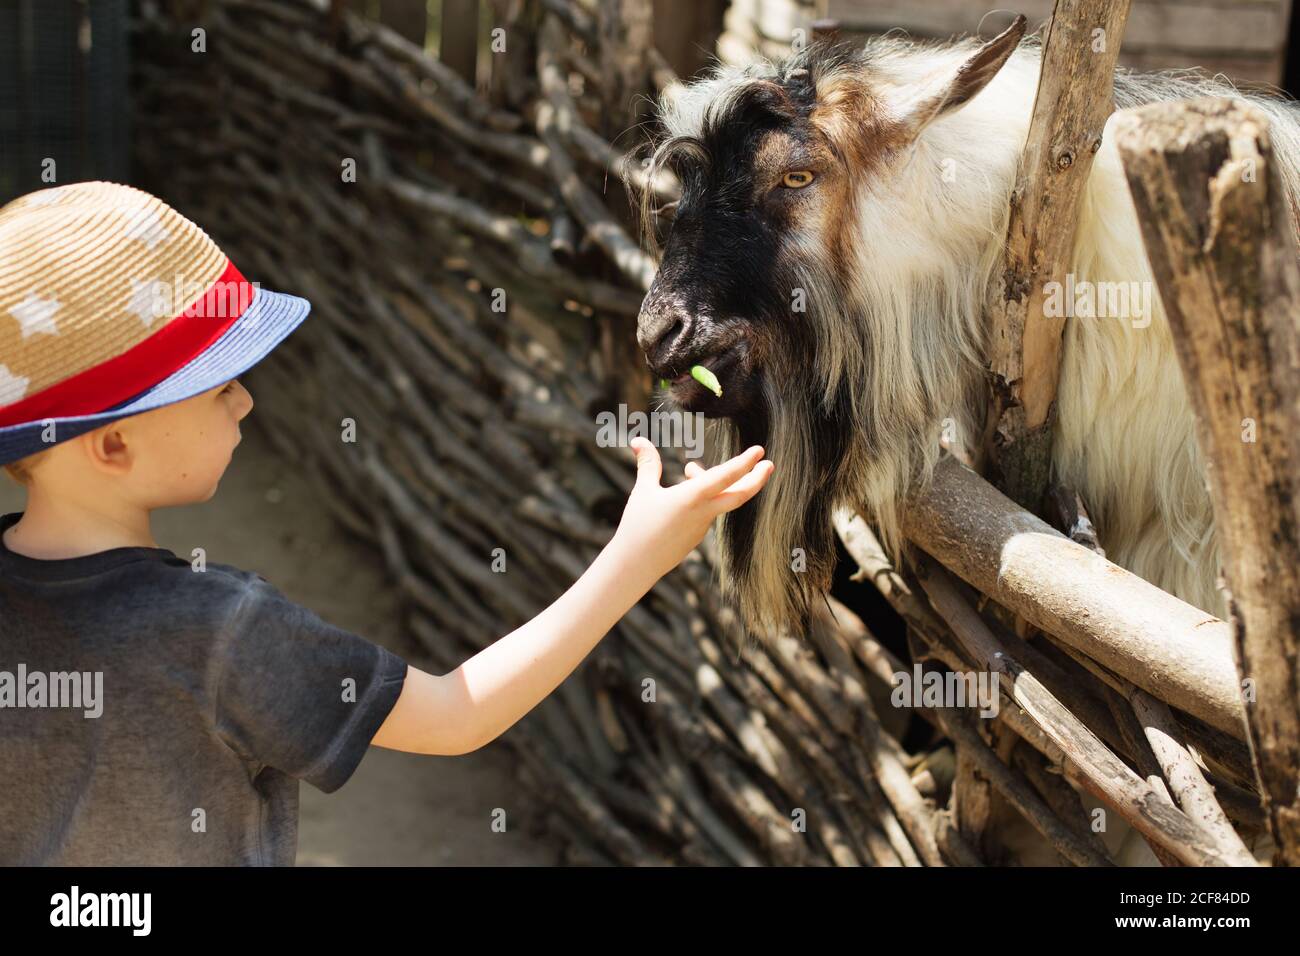 The little boy feeds goats on a farm. Little baby and goats. Child feeds goat at pet zoo. Holidays in the country. Active leisure with children outdoo Stock Photo